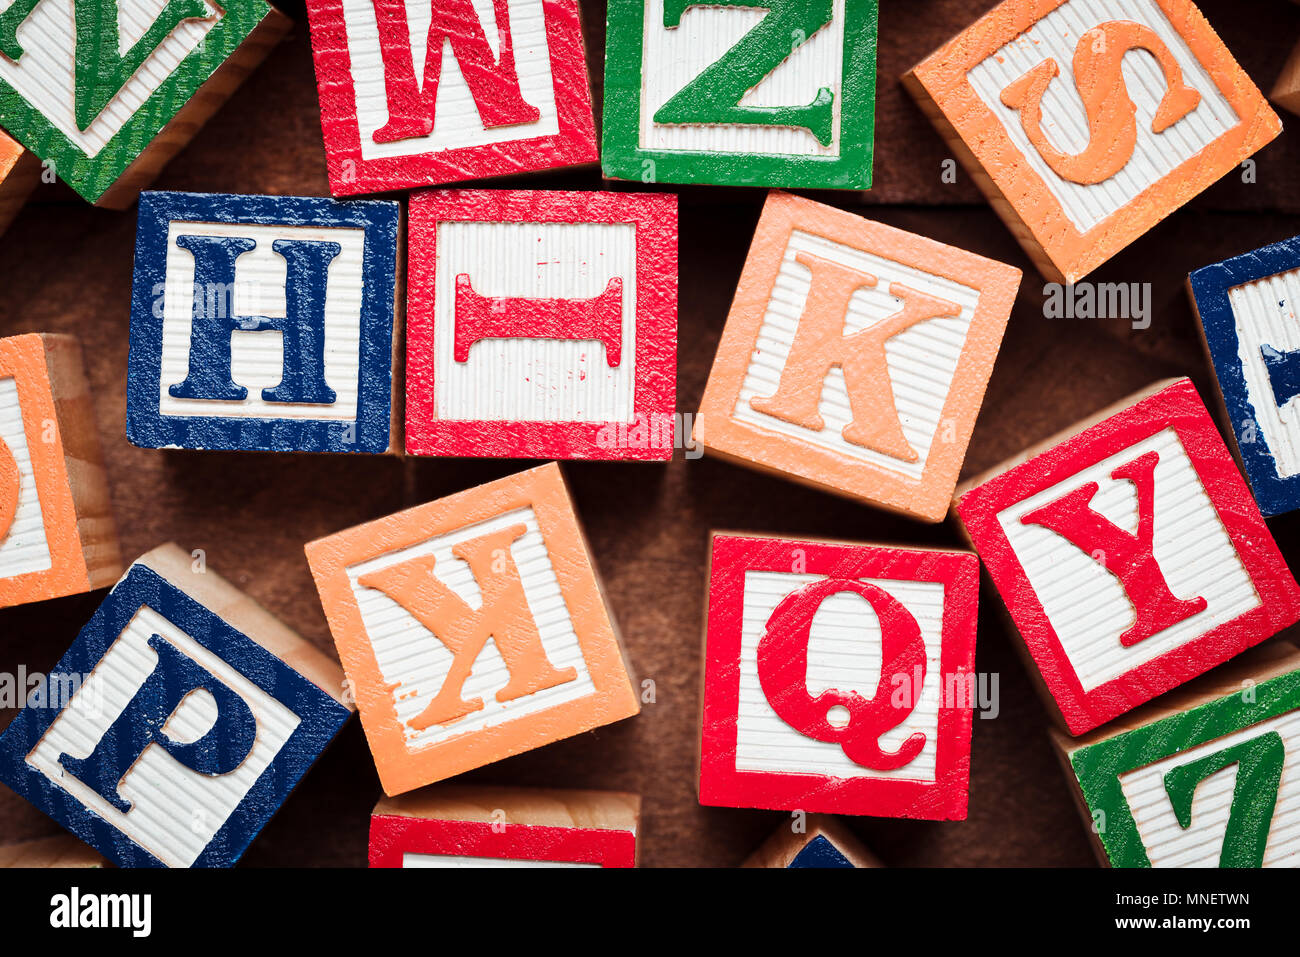 Colorful wooden letter blocks making the on brown wood background Stock Photo